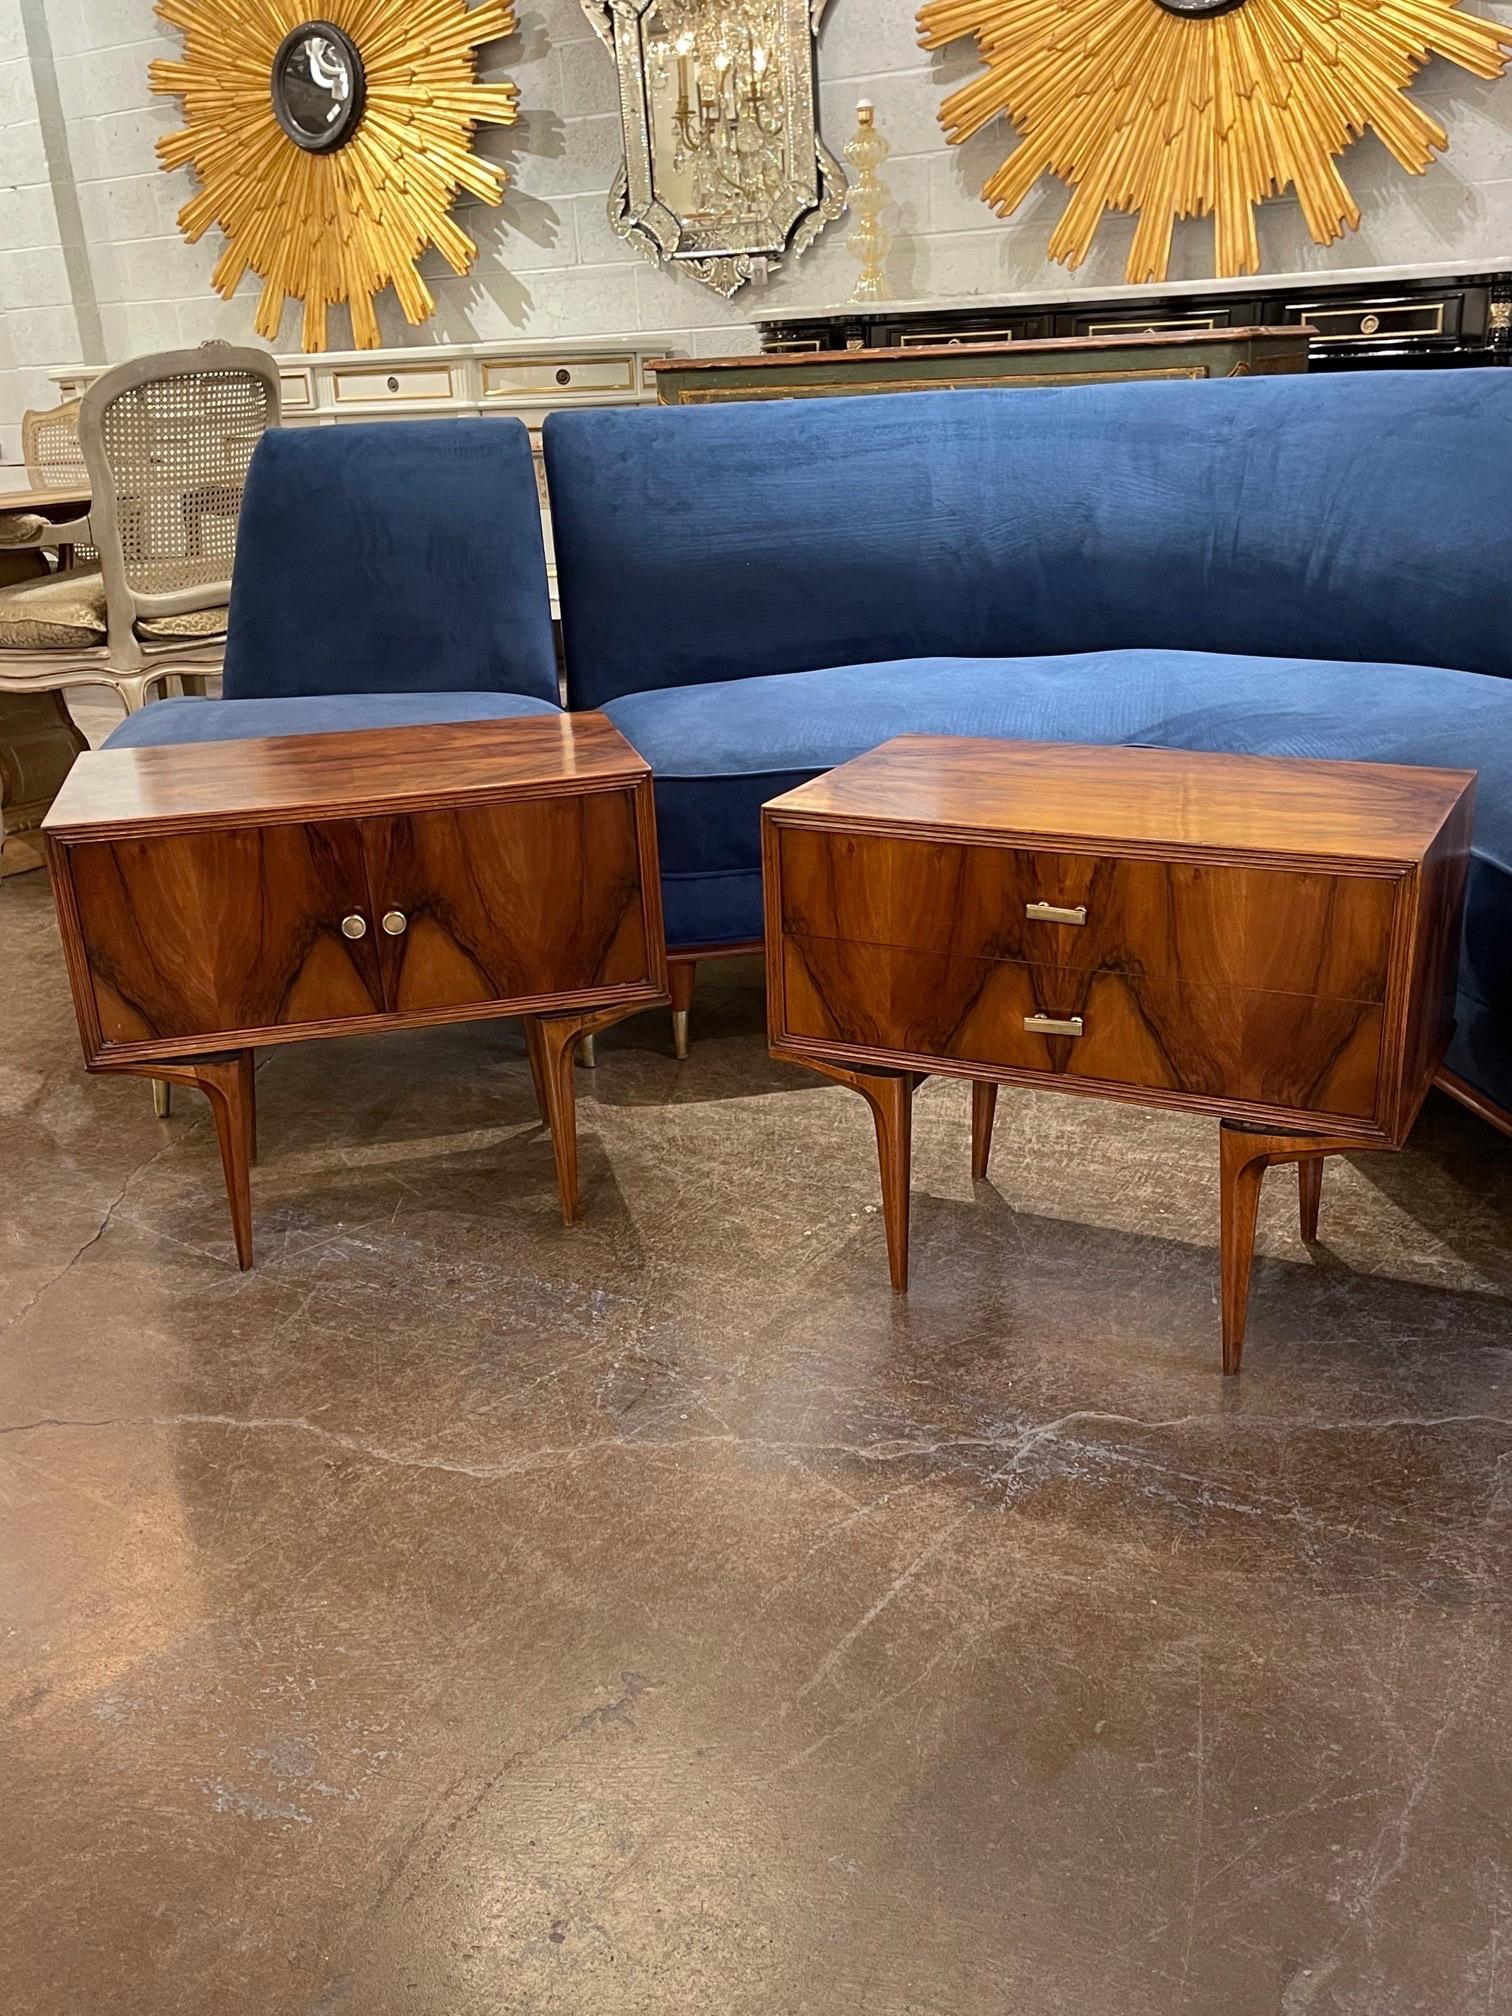 Handsome pair of antique Art Deco style burl walnut side tables. This pair is very fine quality. They are similar but not exactly the same. Makes a stylish statement!!